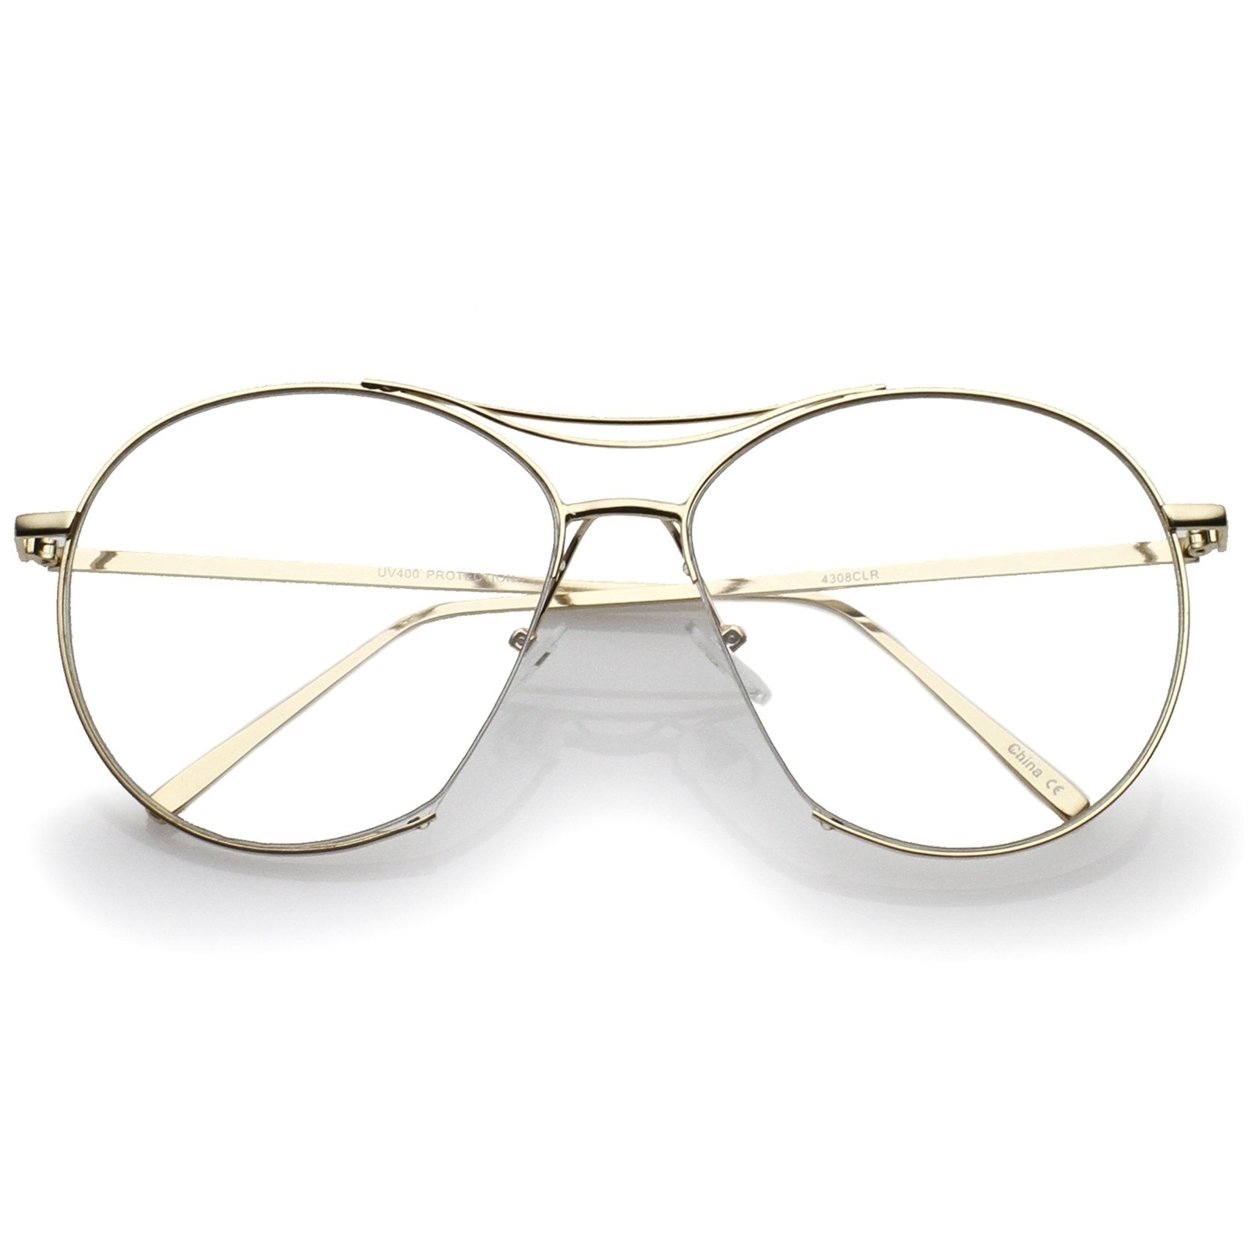 Oversize Semi-Rimless Brow Bar Round Clear Flat Lens Aviator Eyeglasses 59mm - Gold / Clear